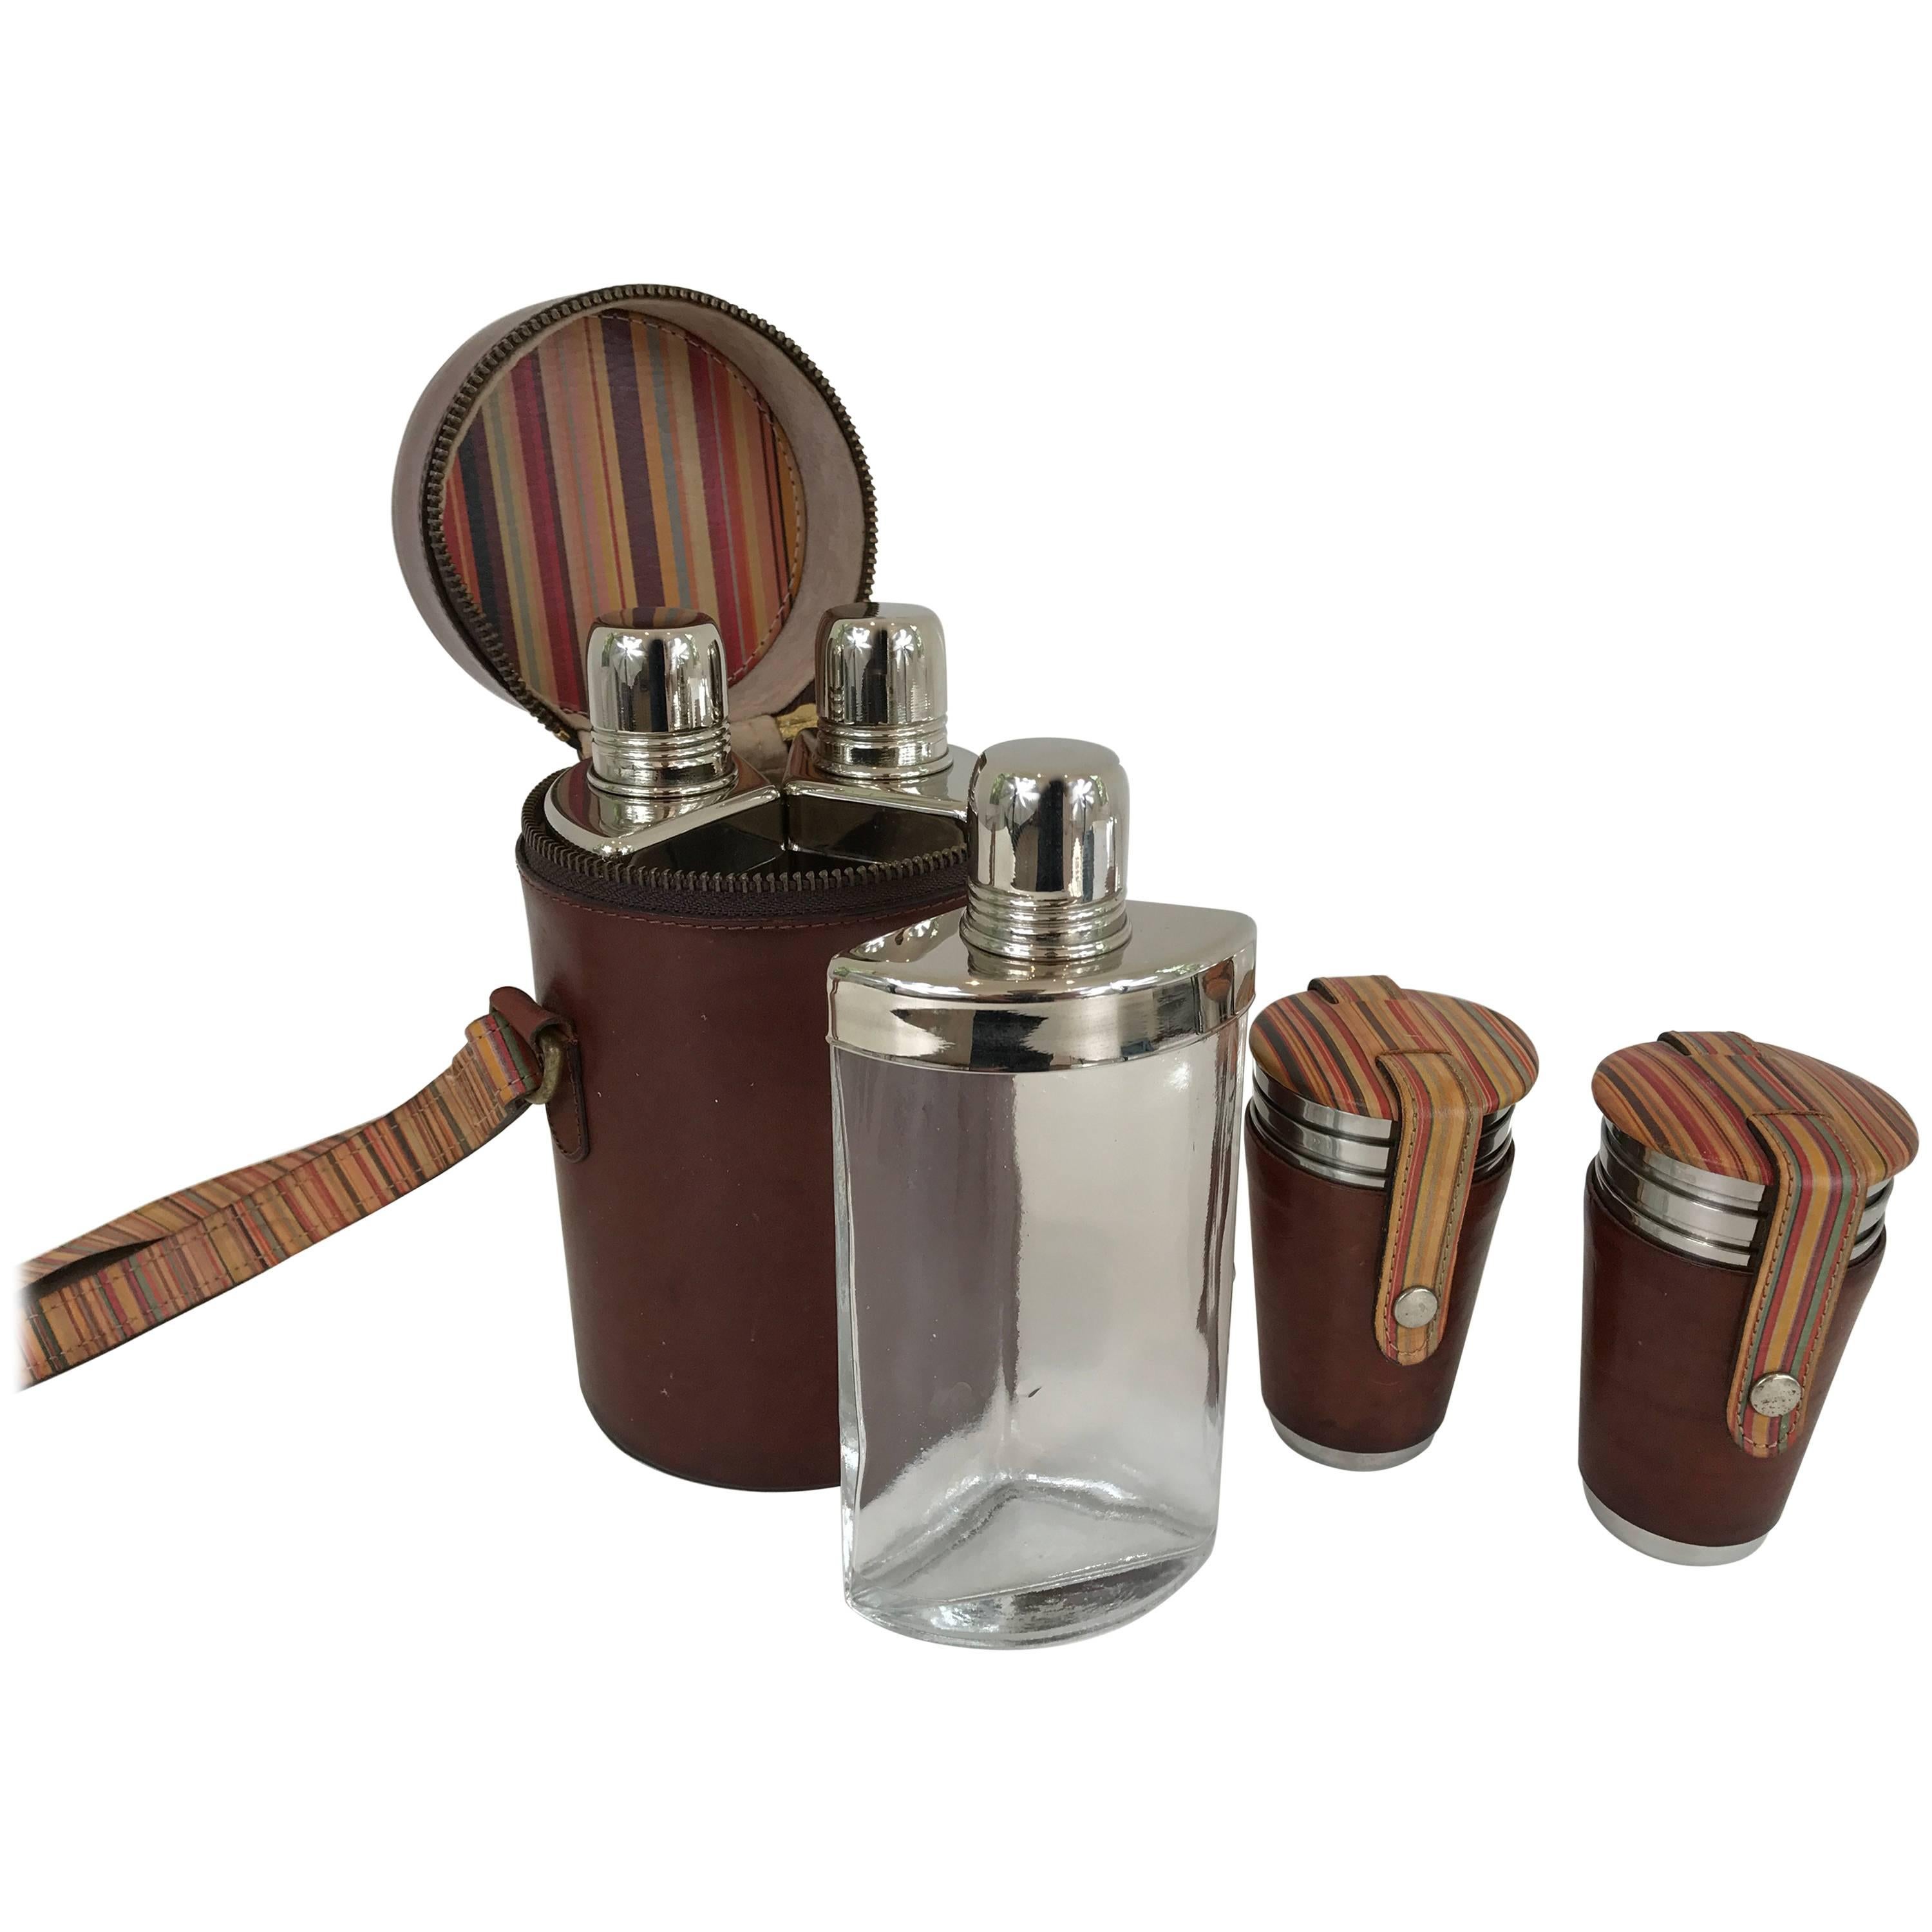 Limited Edition Paul Smith Traveling Flask Set and Julep Cups